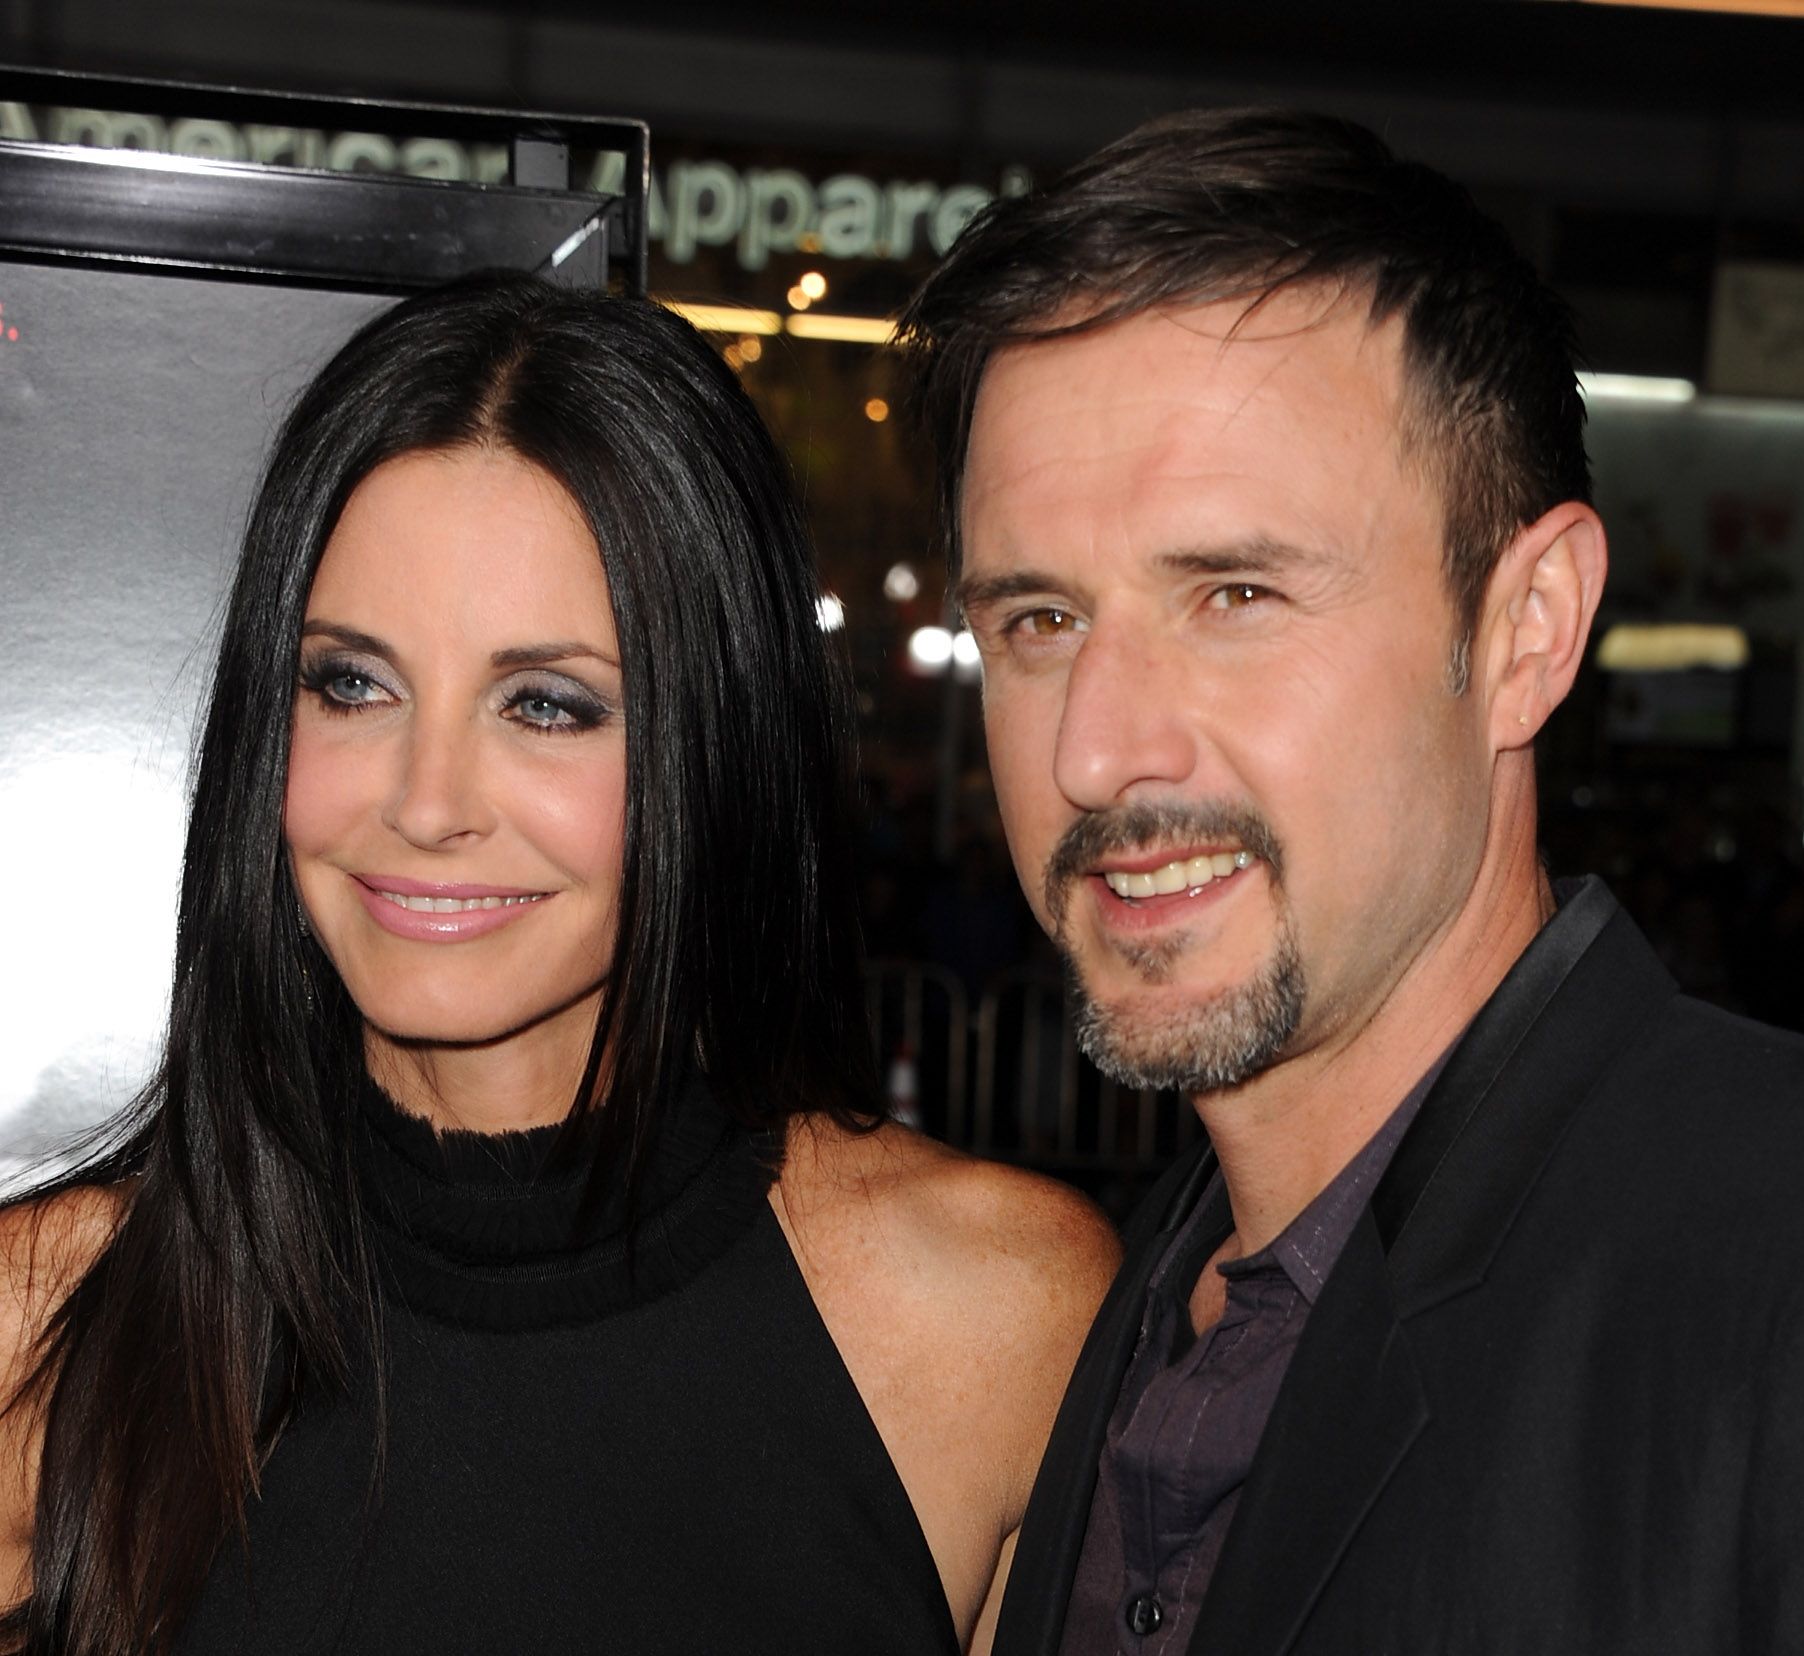 Courteney Cox and David Arquette at the premiere of "Scream 4" at Grauman's Chinese Theatre in Hollywood, California in 2011 | Source: Getty Images